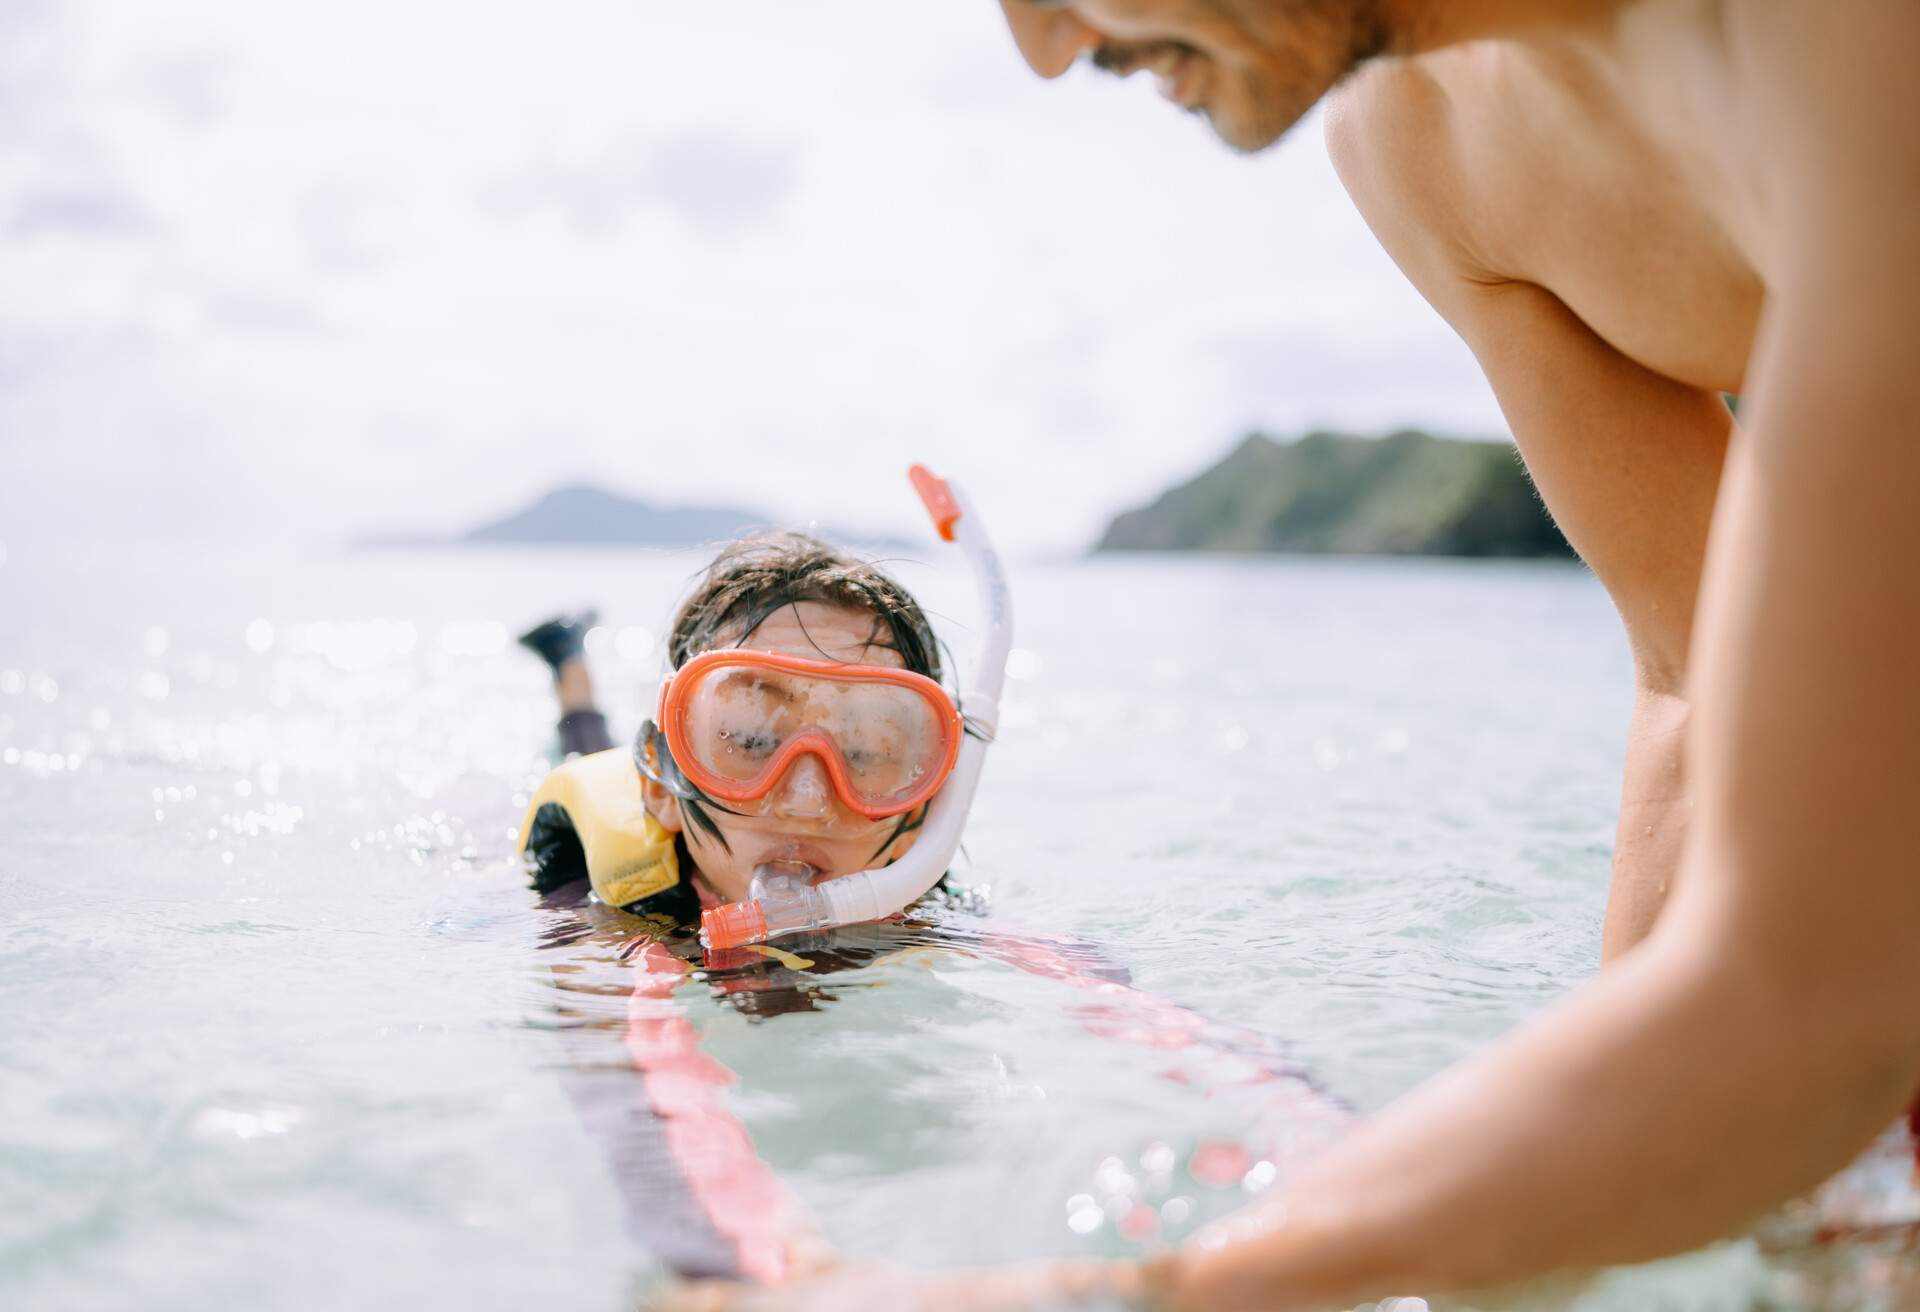 Father teaching his daughter how to snorkel in clear shallow water, Okinawa, Japan